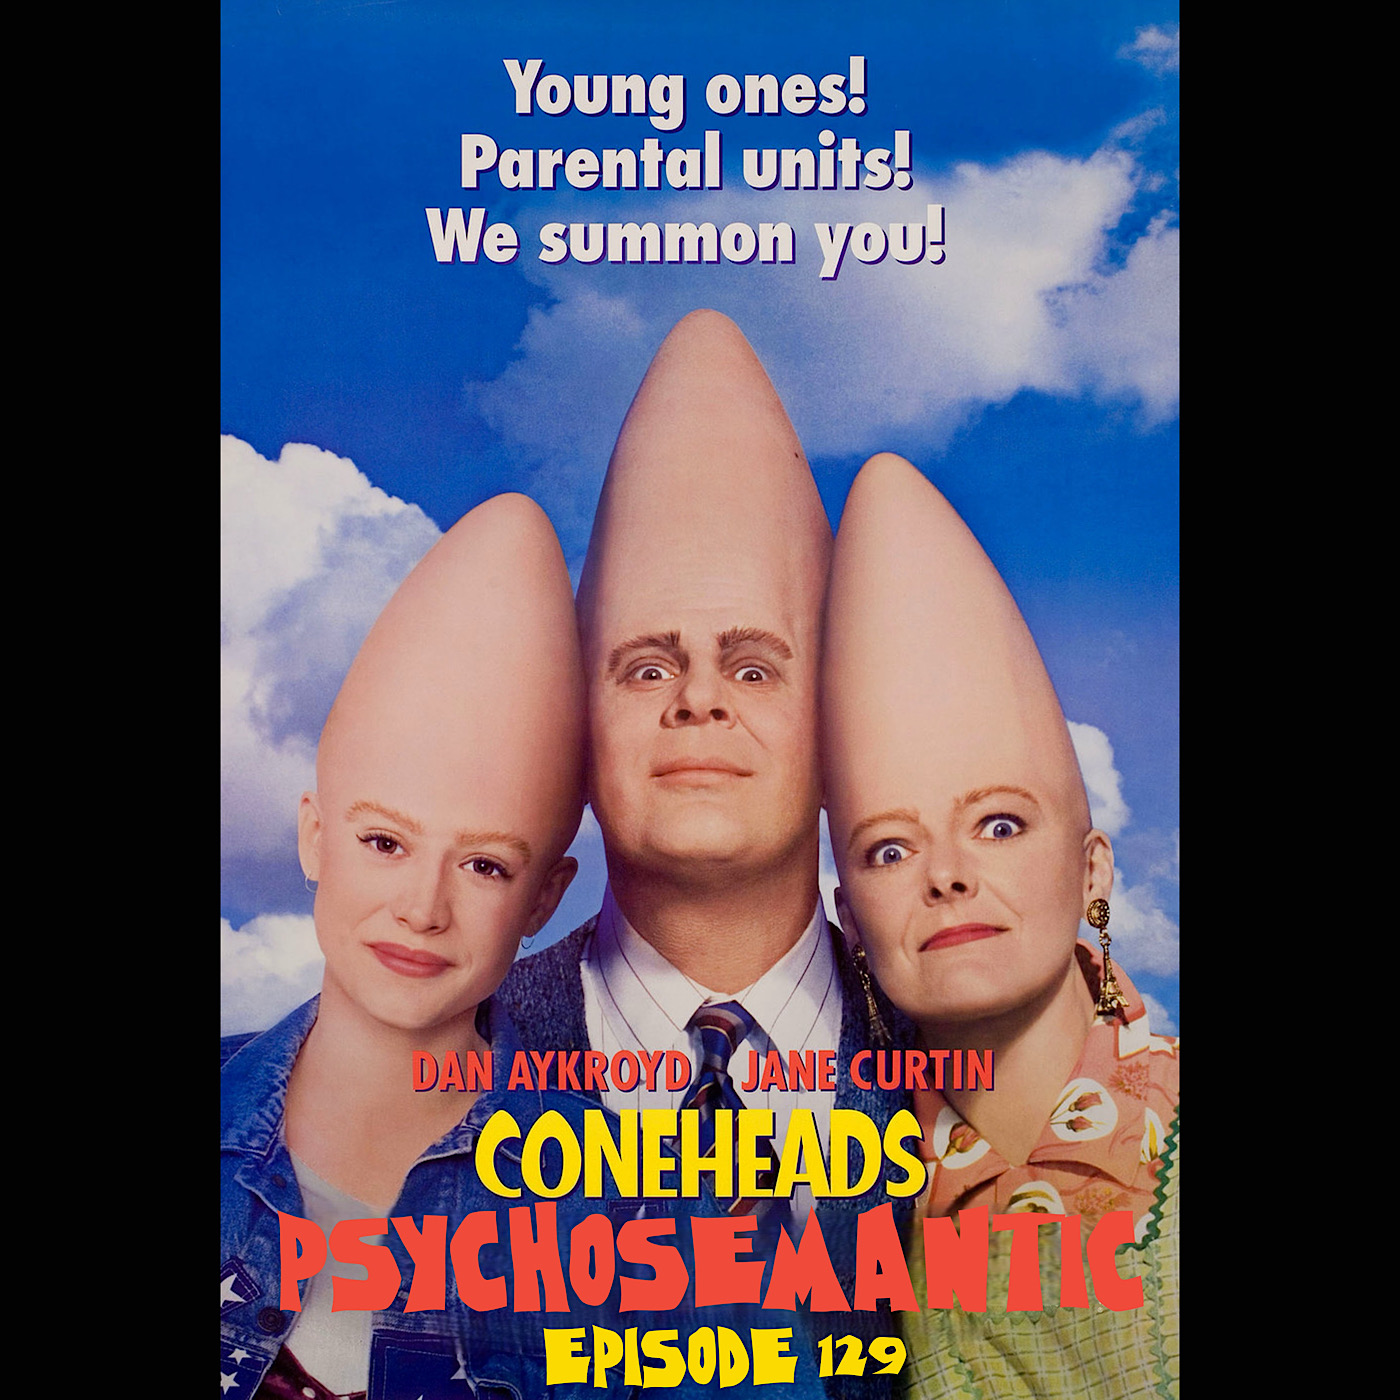 The Psychosemantic Podcast EP 129: ‘Coneheads’ and immigration